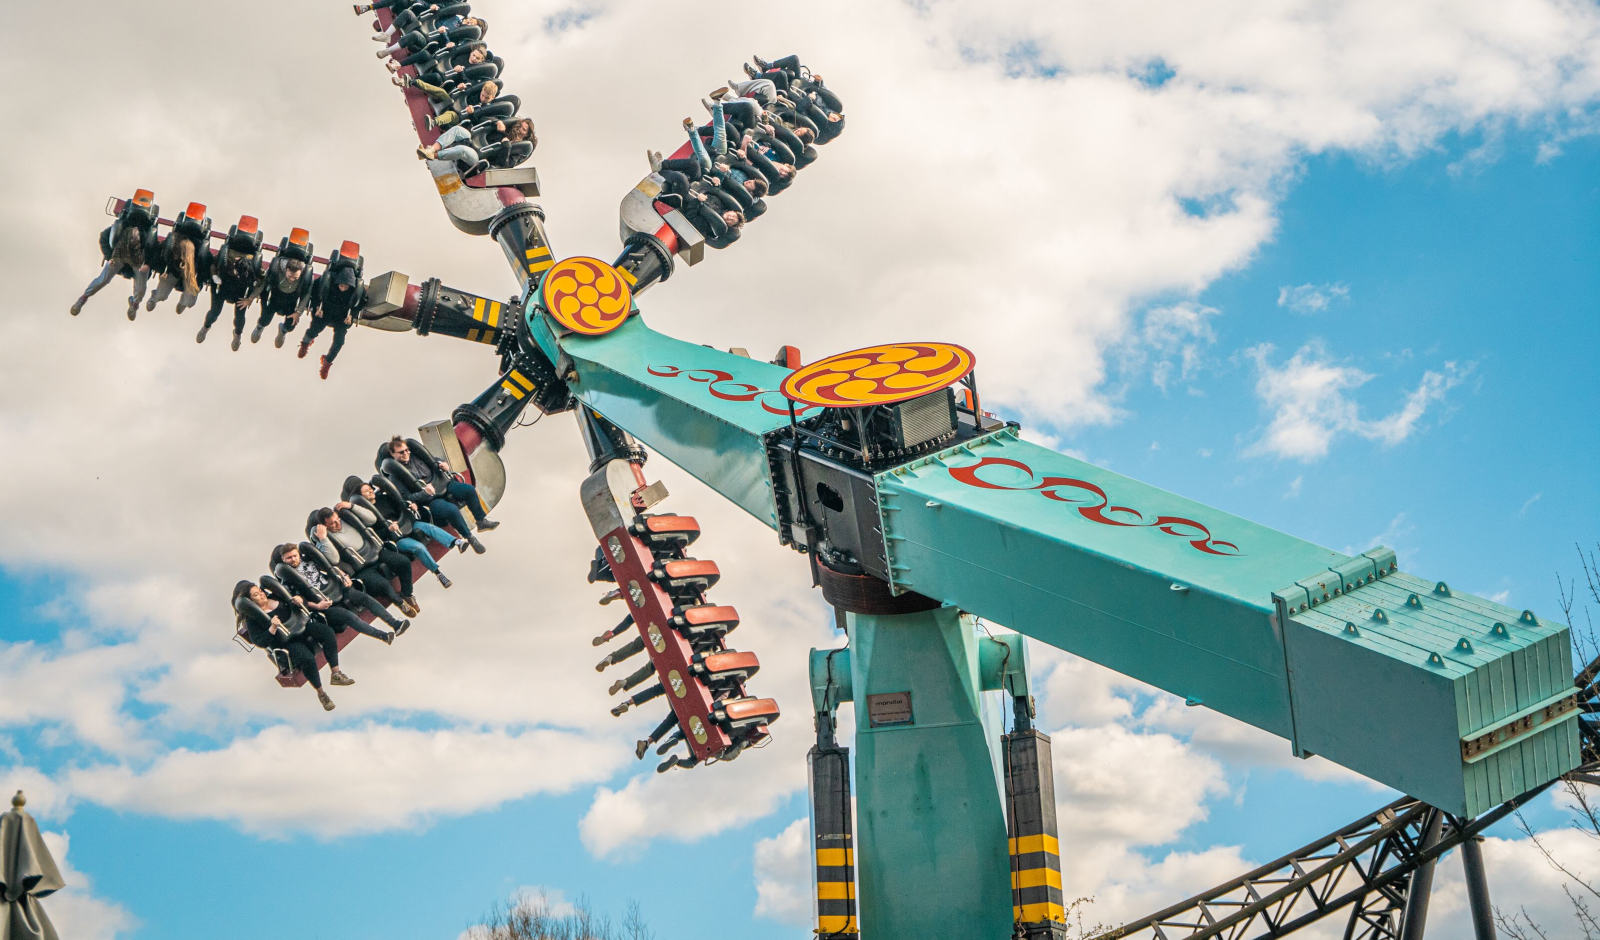 Discover unforgettable thrills at Thorpe Park where endless fun awaits